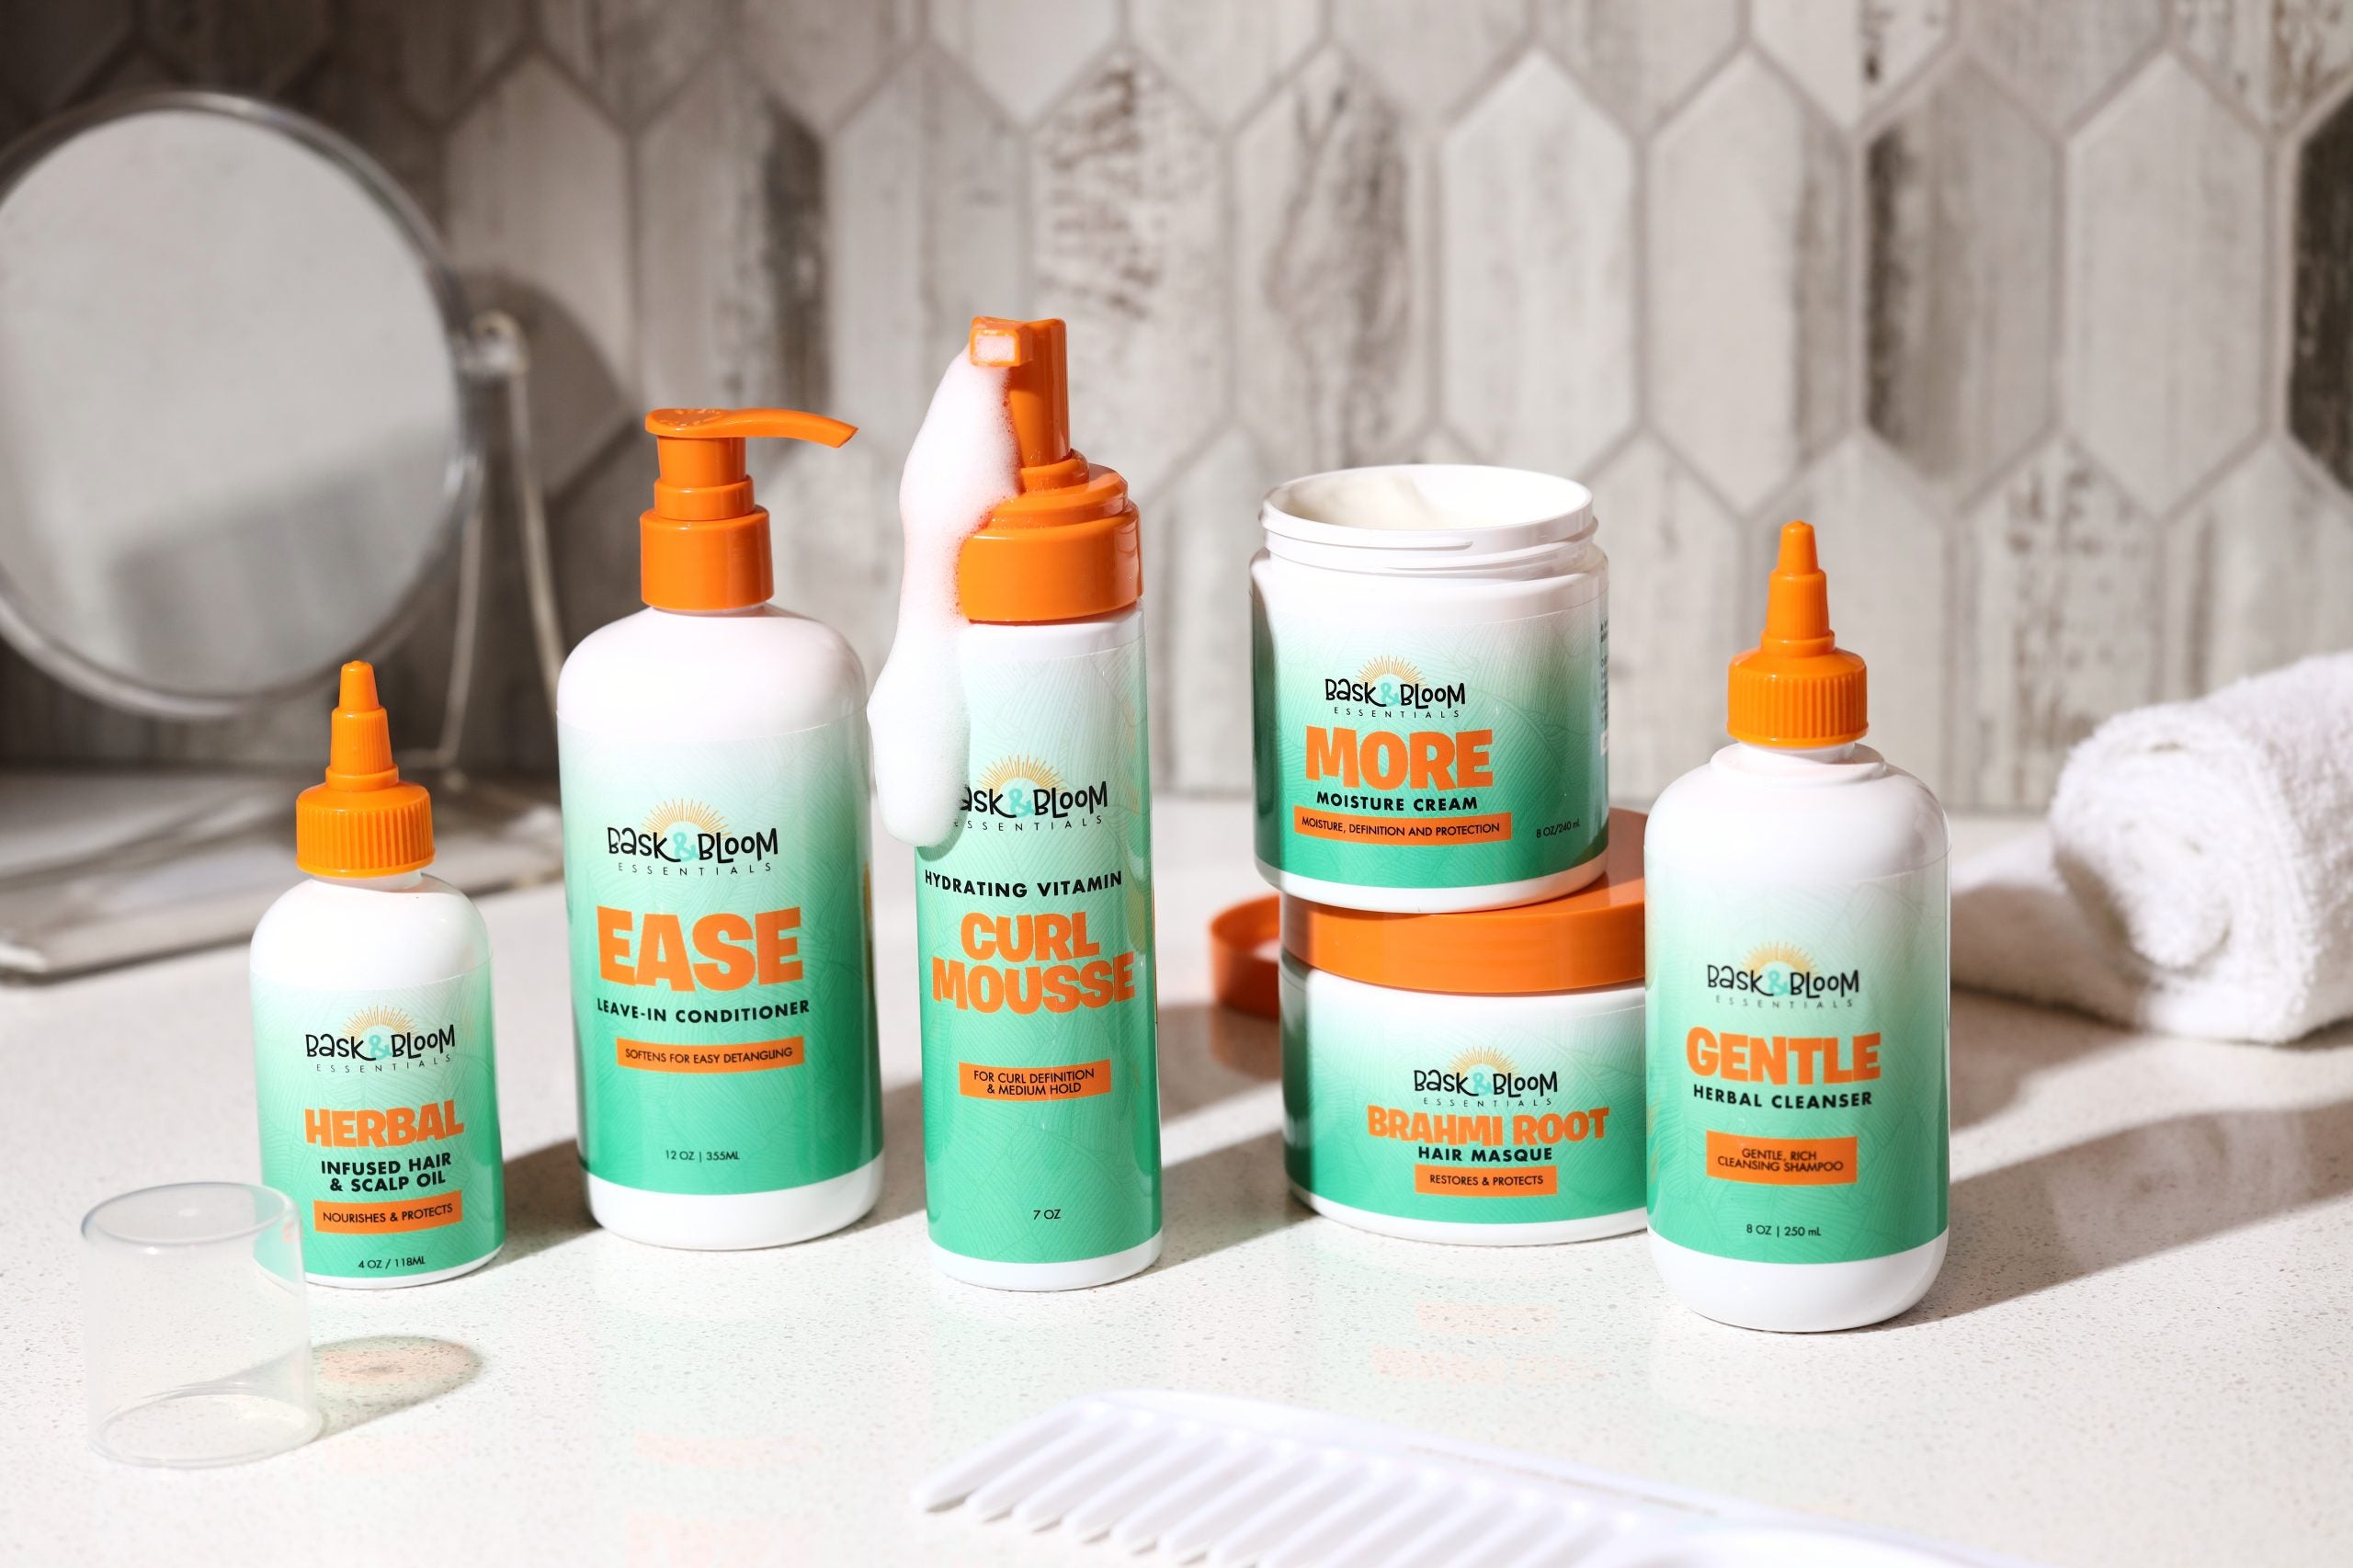 A Mom Of Three Experienced Severe Postpartum Shedding, So She Created A Hair-Care Line As A Solution